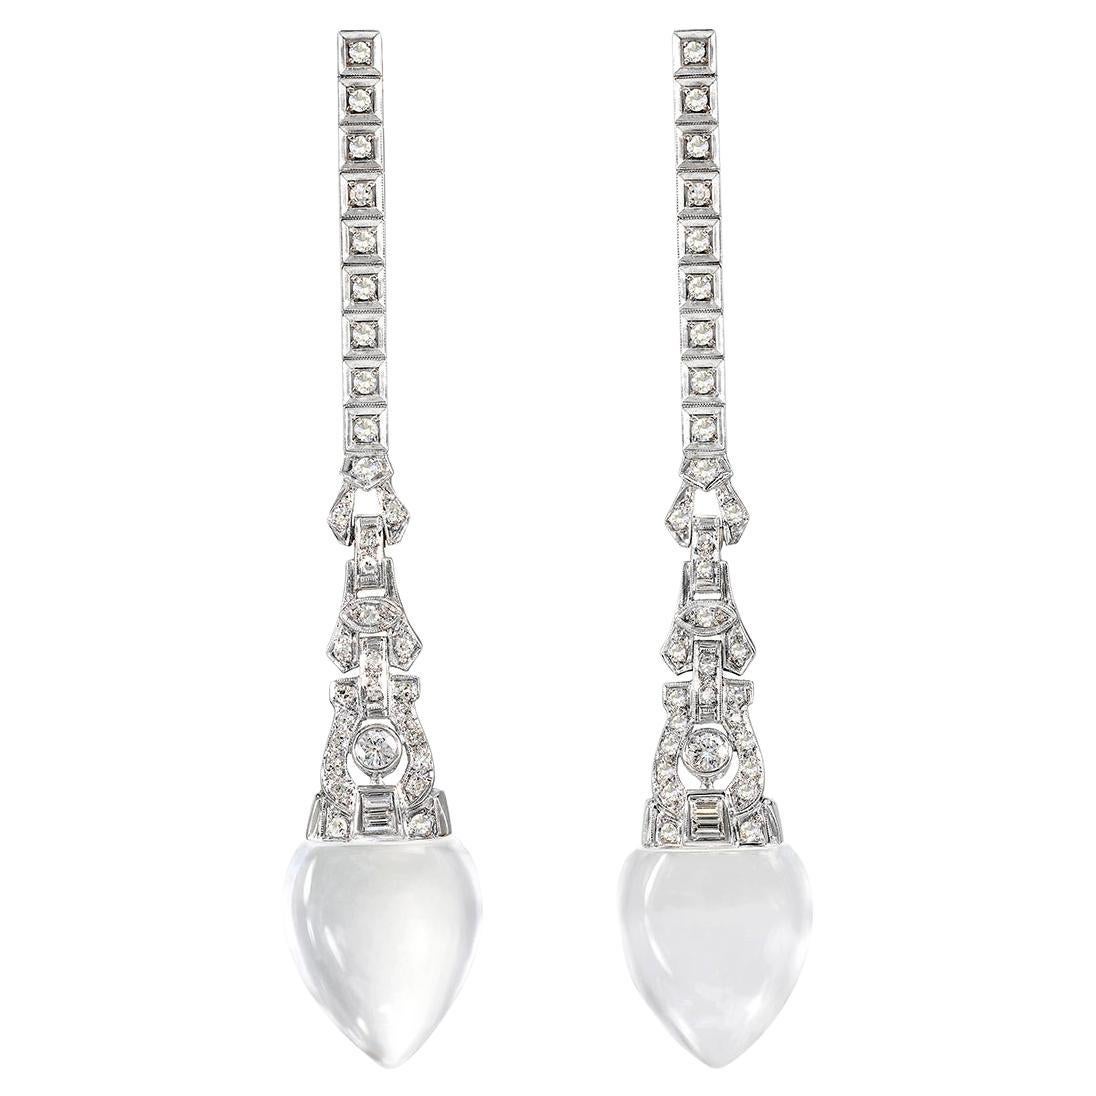 Vintage 14K White Gold Diamond Earrings with Rock Crystal Quartz Drops For Sale